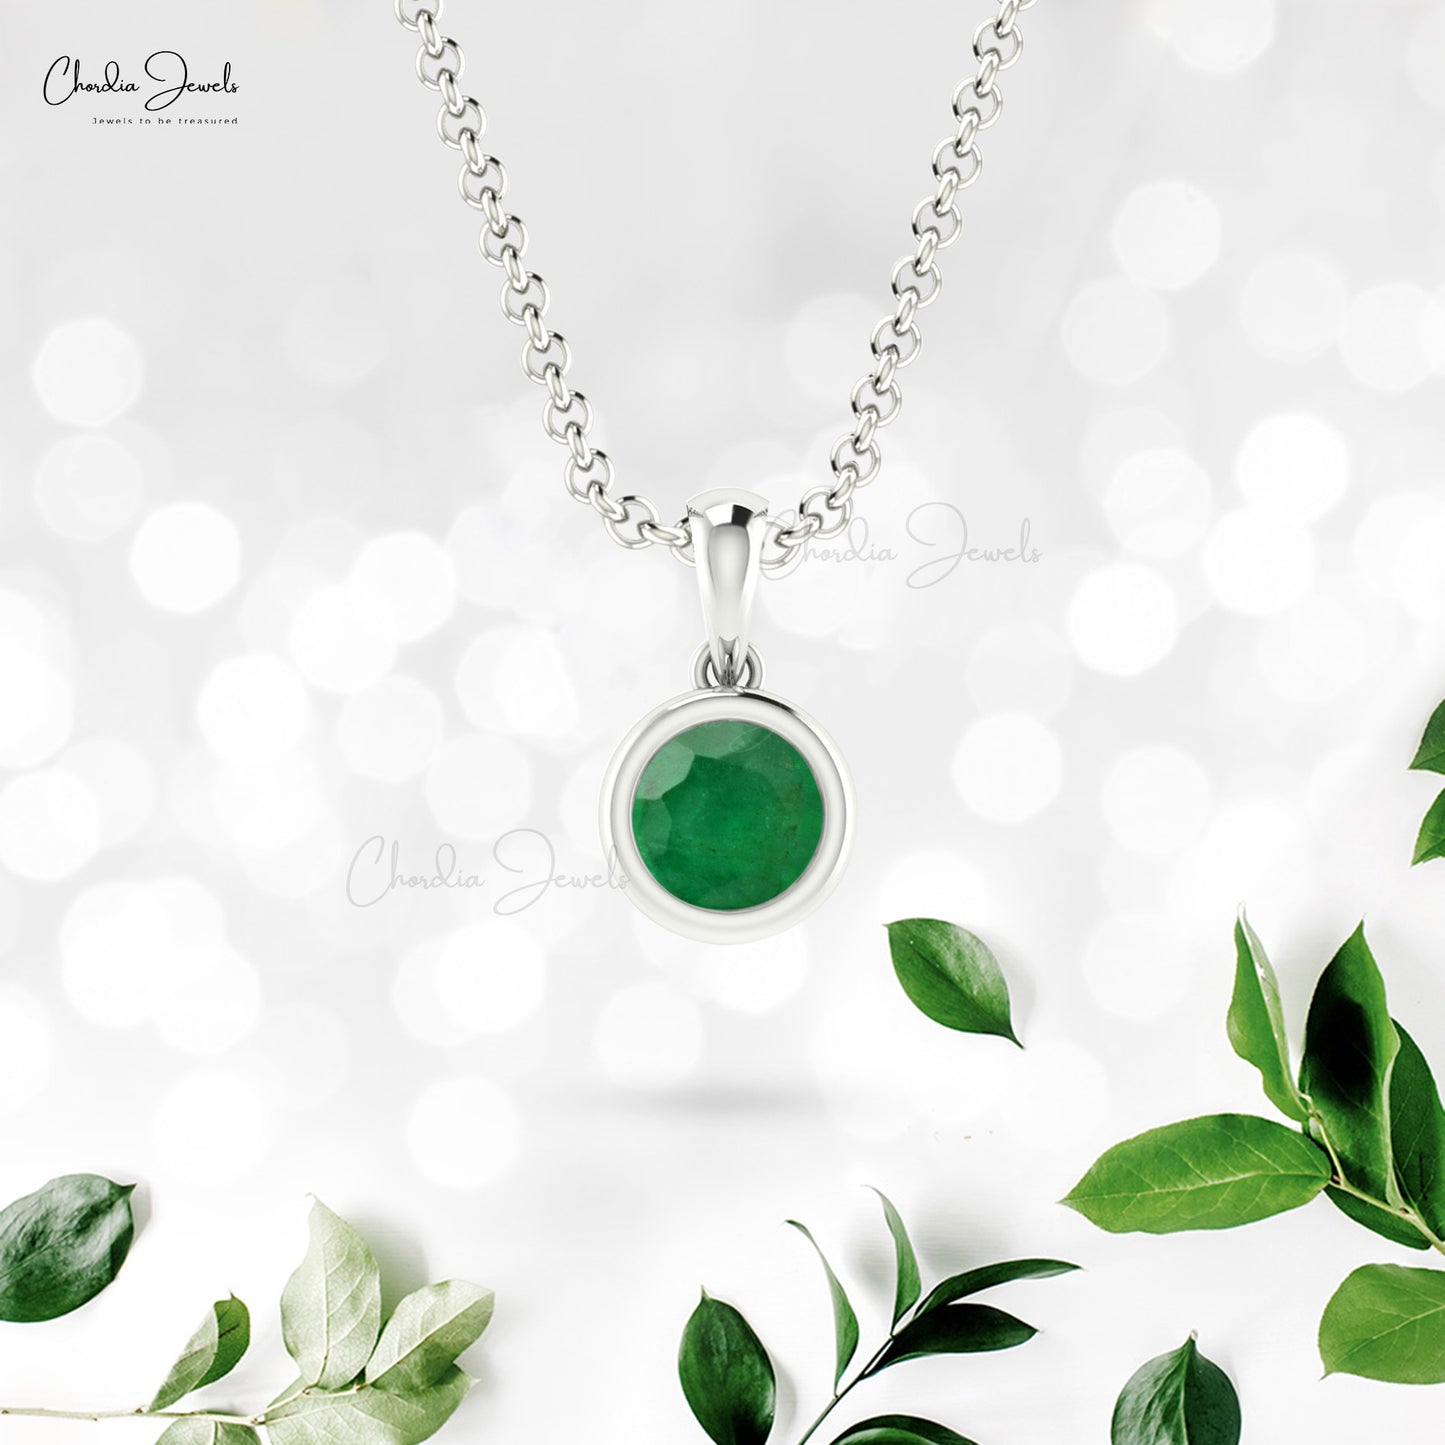 Load image into Gallery viewer, Single Stone Pendant With Emerald Gemstone 14k White Gold May Birthstone Solitaire Pendant
